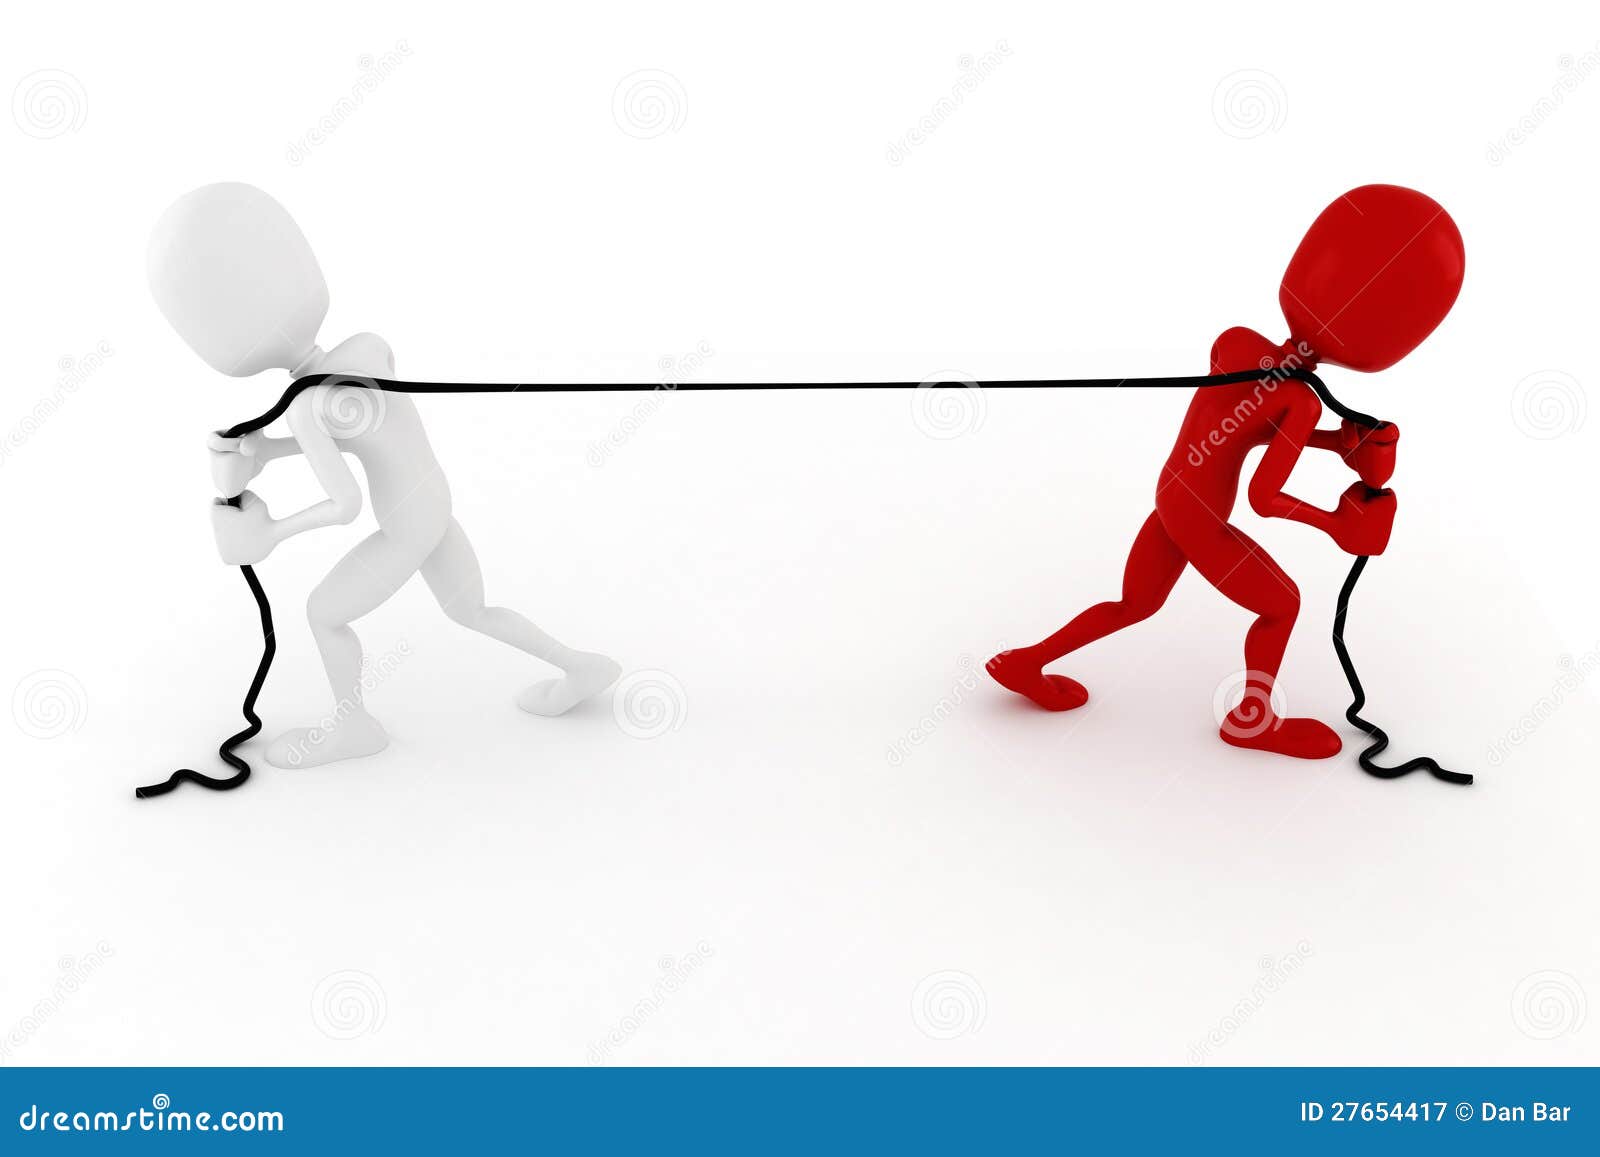 clipart man pulling rope - photo #27